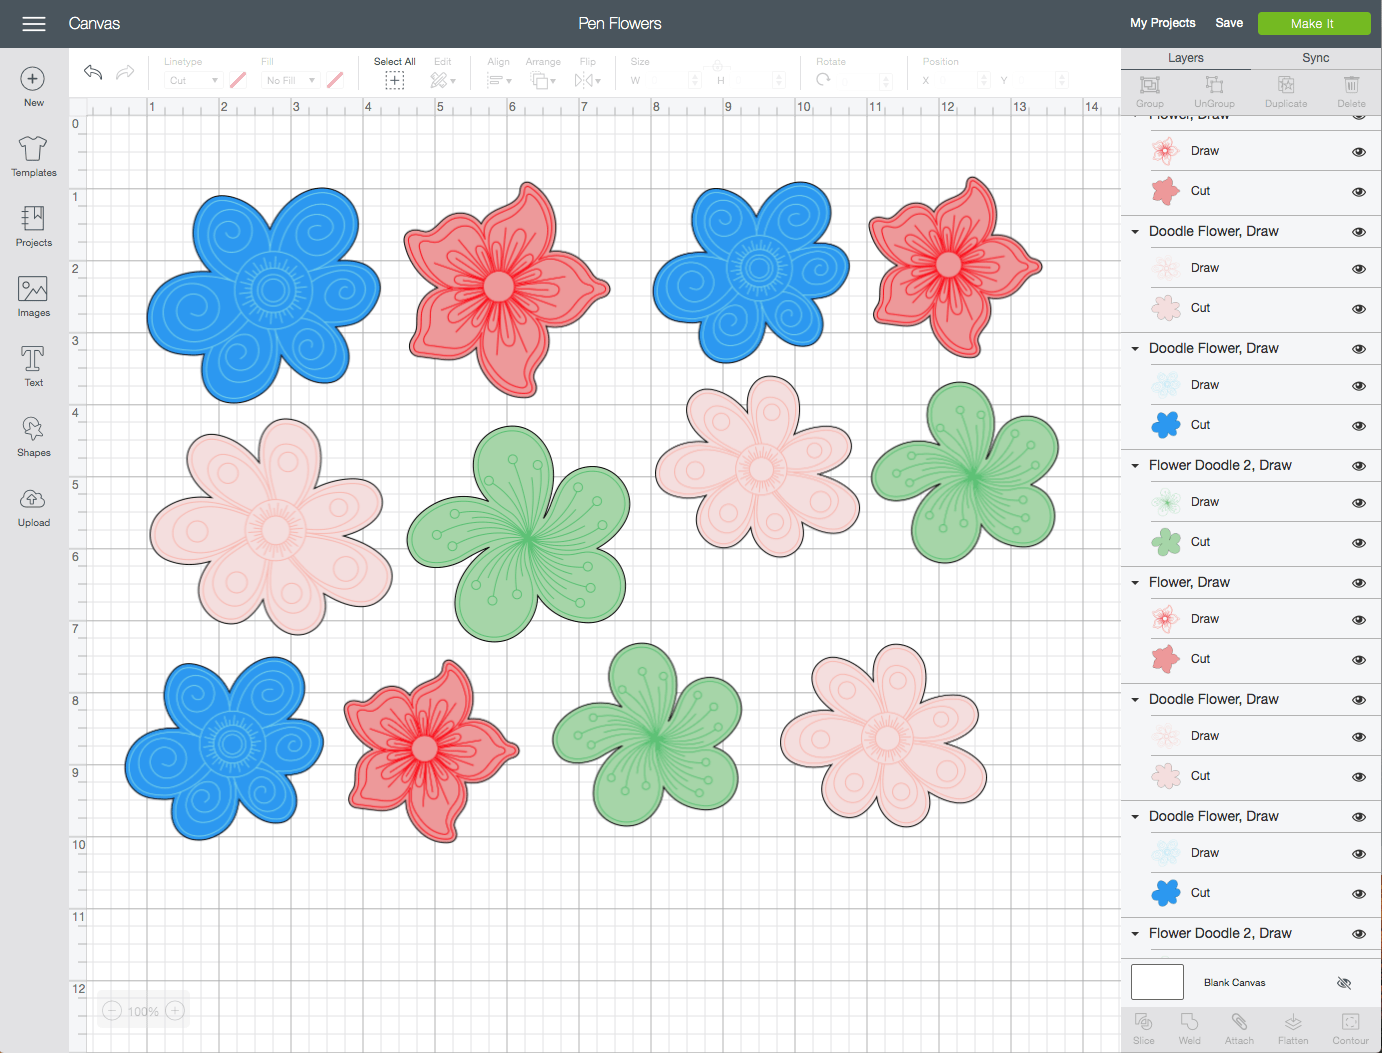 screenshot of the cricut design studio interface. There are multiple flower shapes with linetype designs shown.